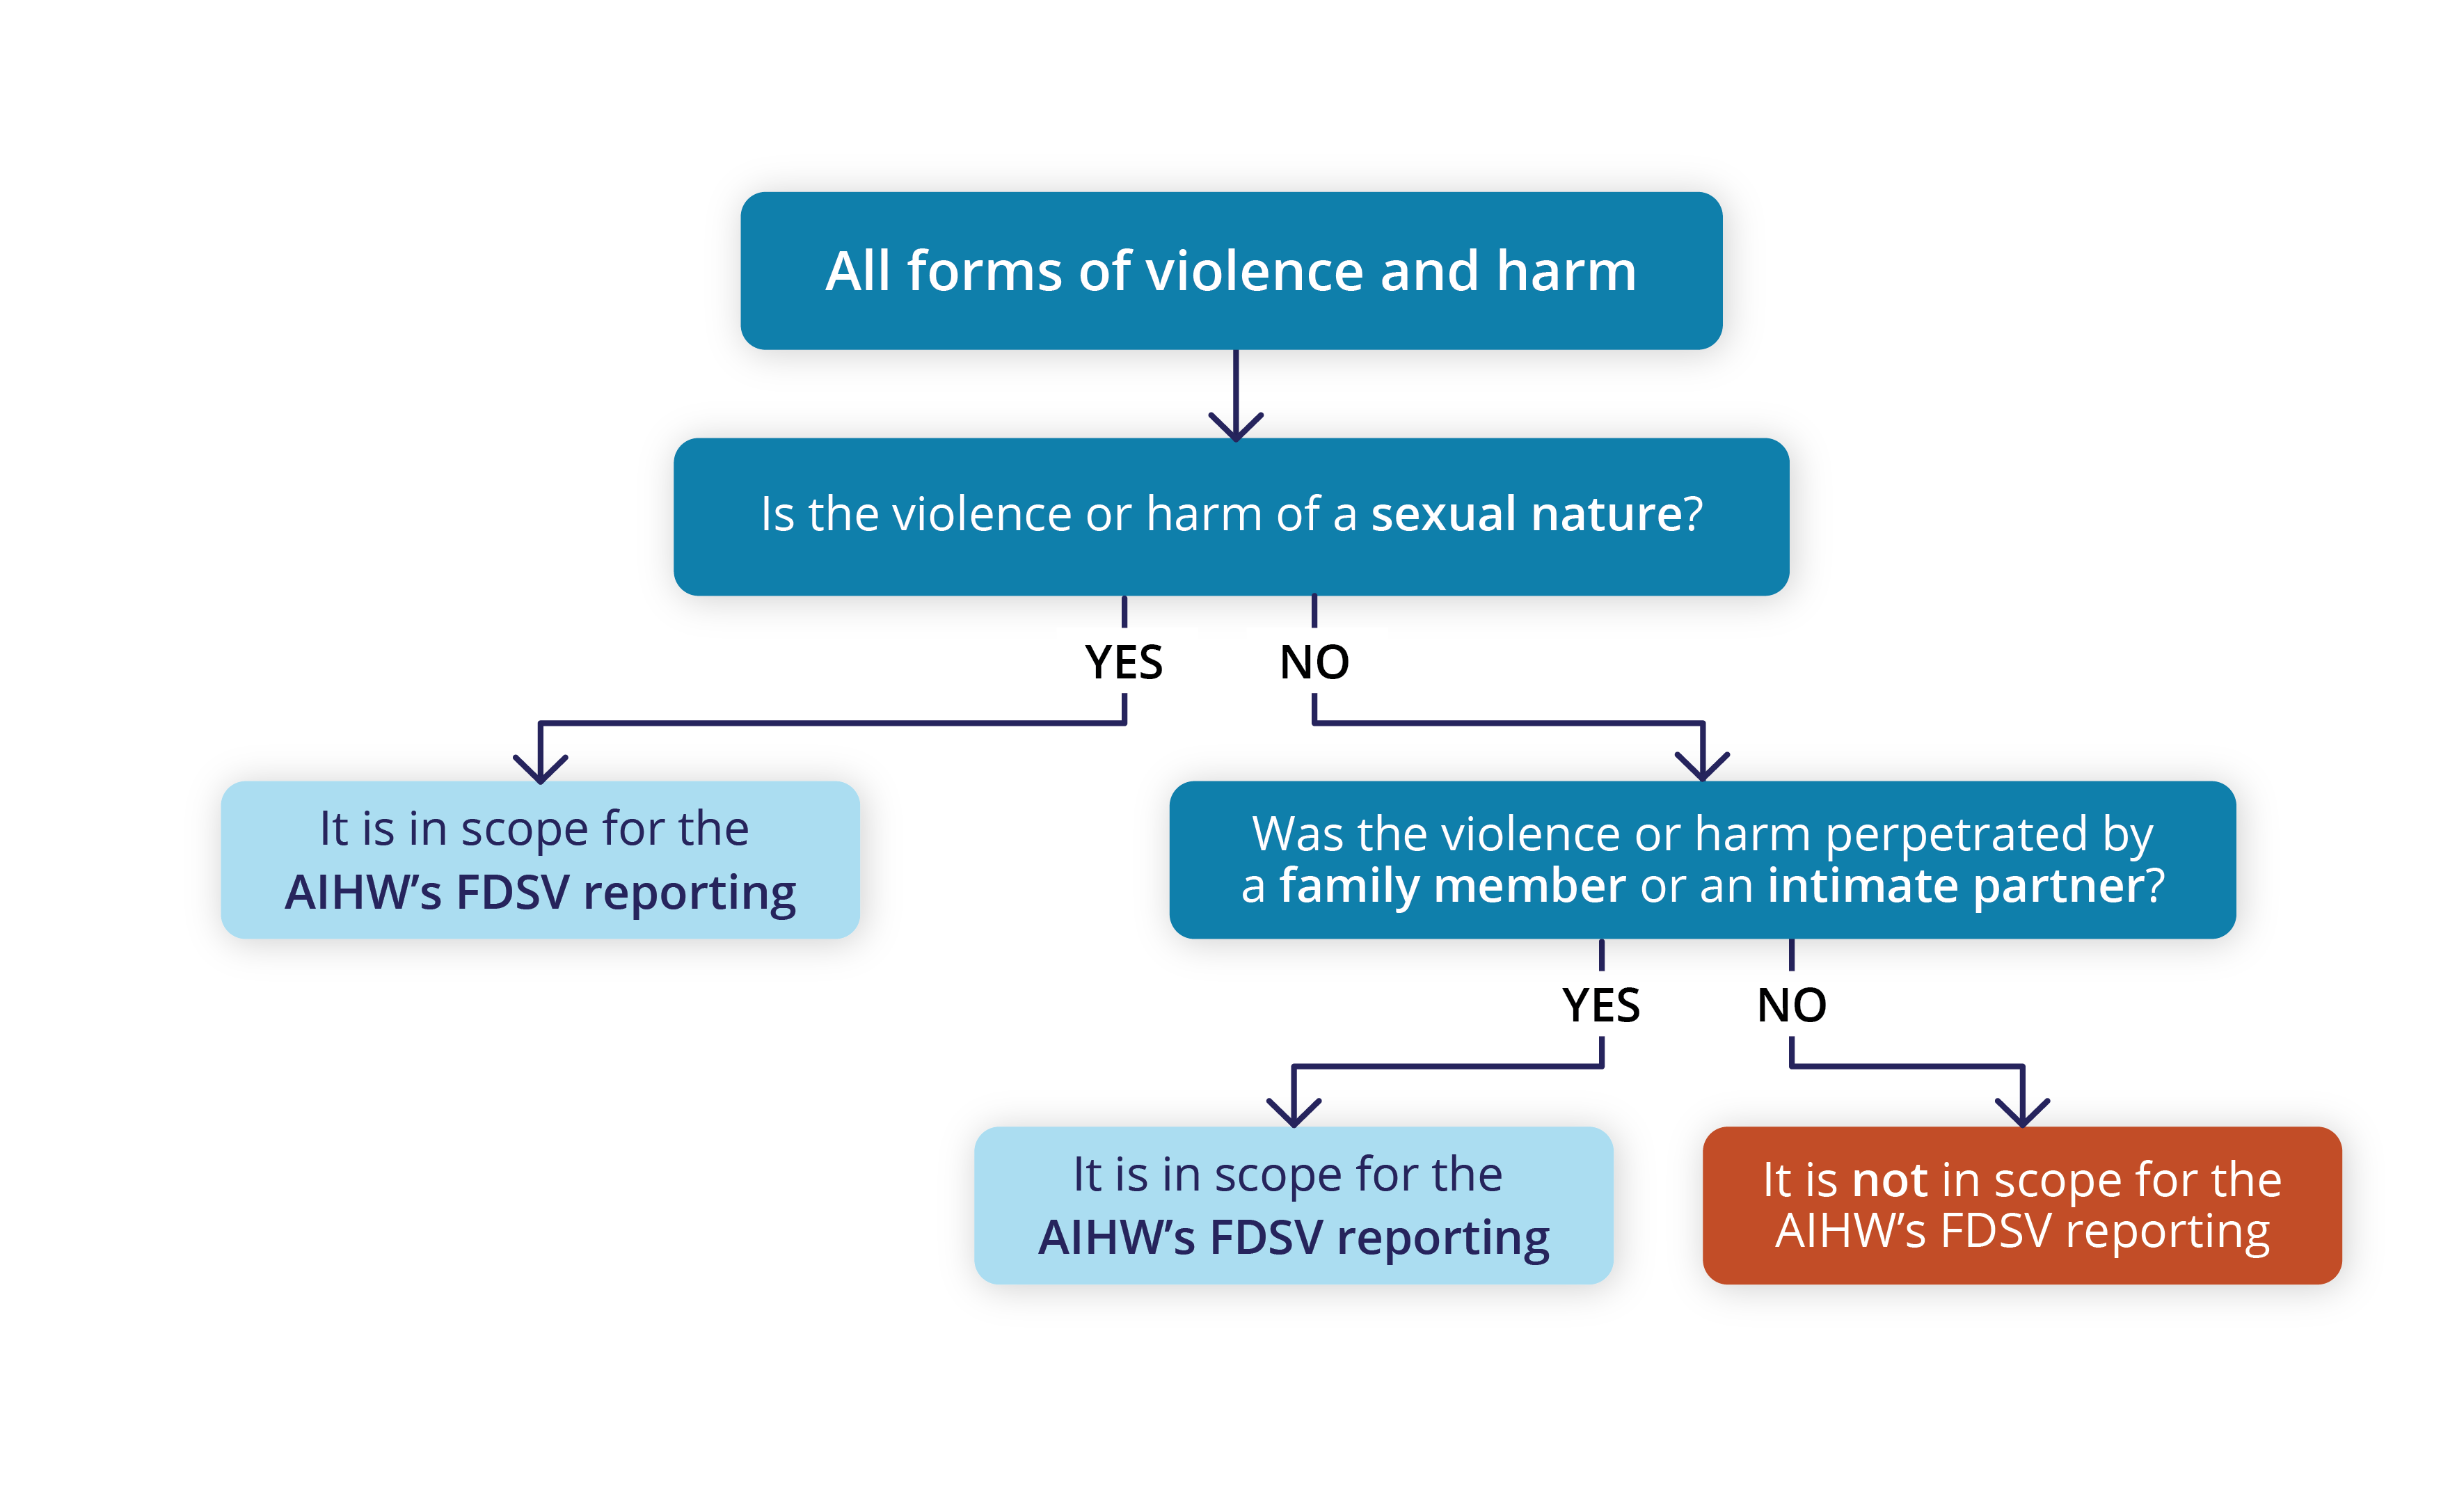 A flow chart shows what is in scope for the AIHW's FDSV reporting. There are six boxes linked by arrows. The boxes contain questions that can be answered yes or no. The chart shows that all violence or harm of a sexual nature is in scope, and all violence or harm perpetrated by a family member or an intimate partner is in scope.